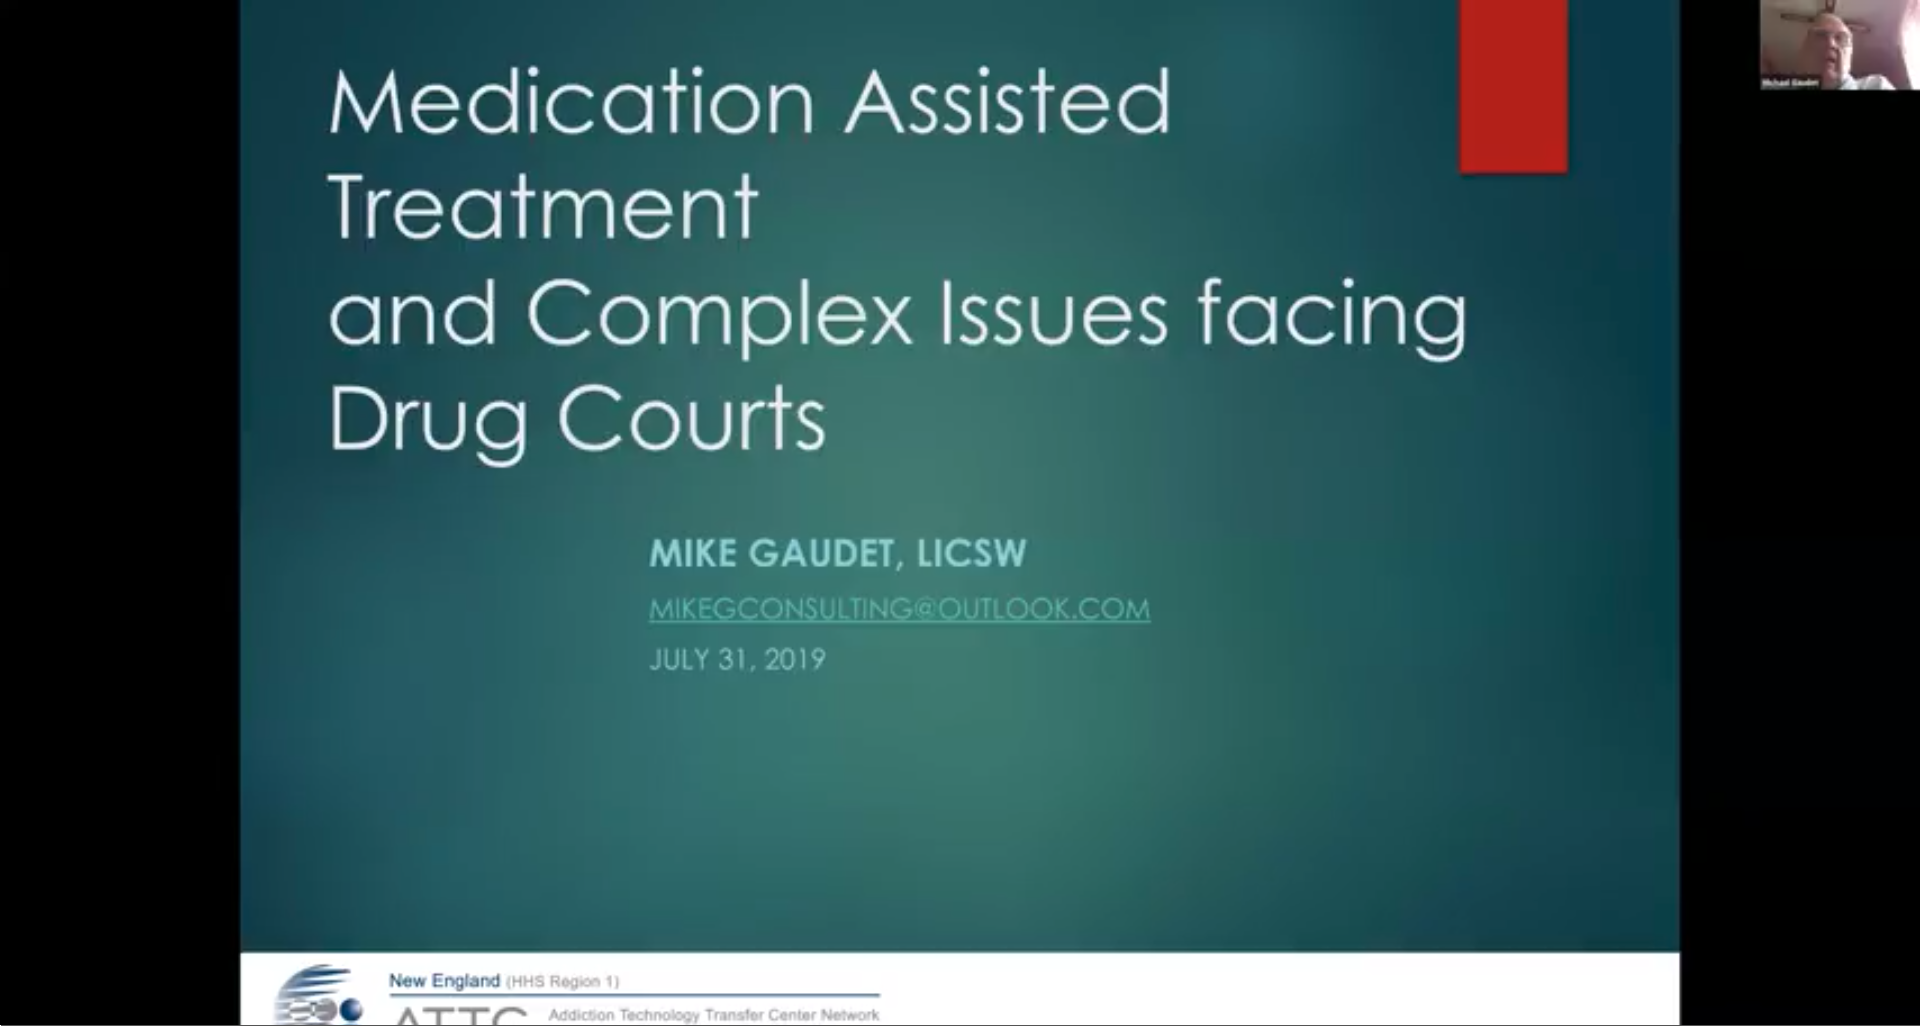 Medication Assisted Treatment and Complex Issues Facing Drug Courts